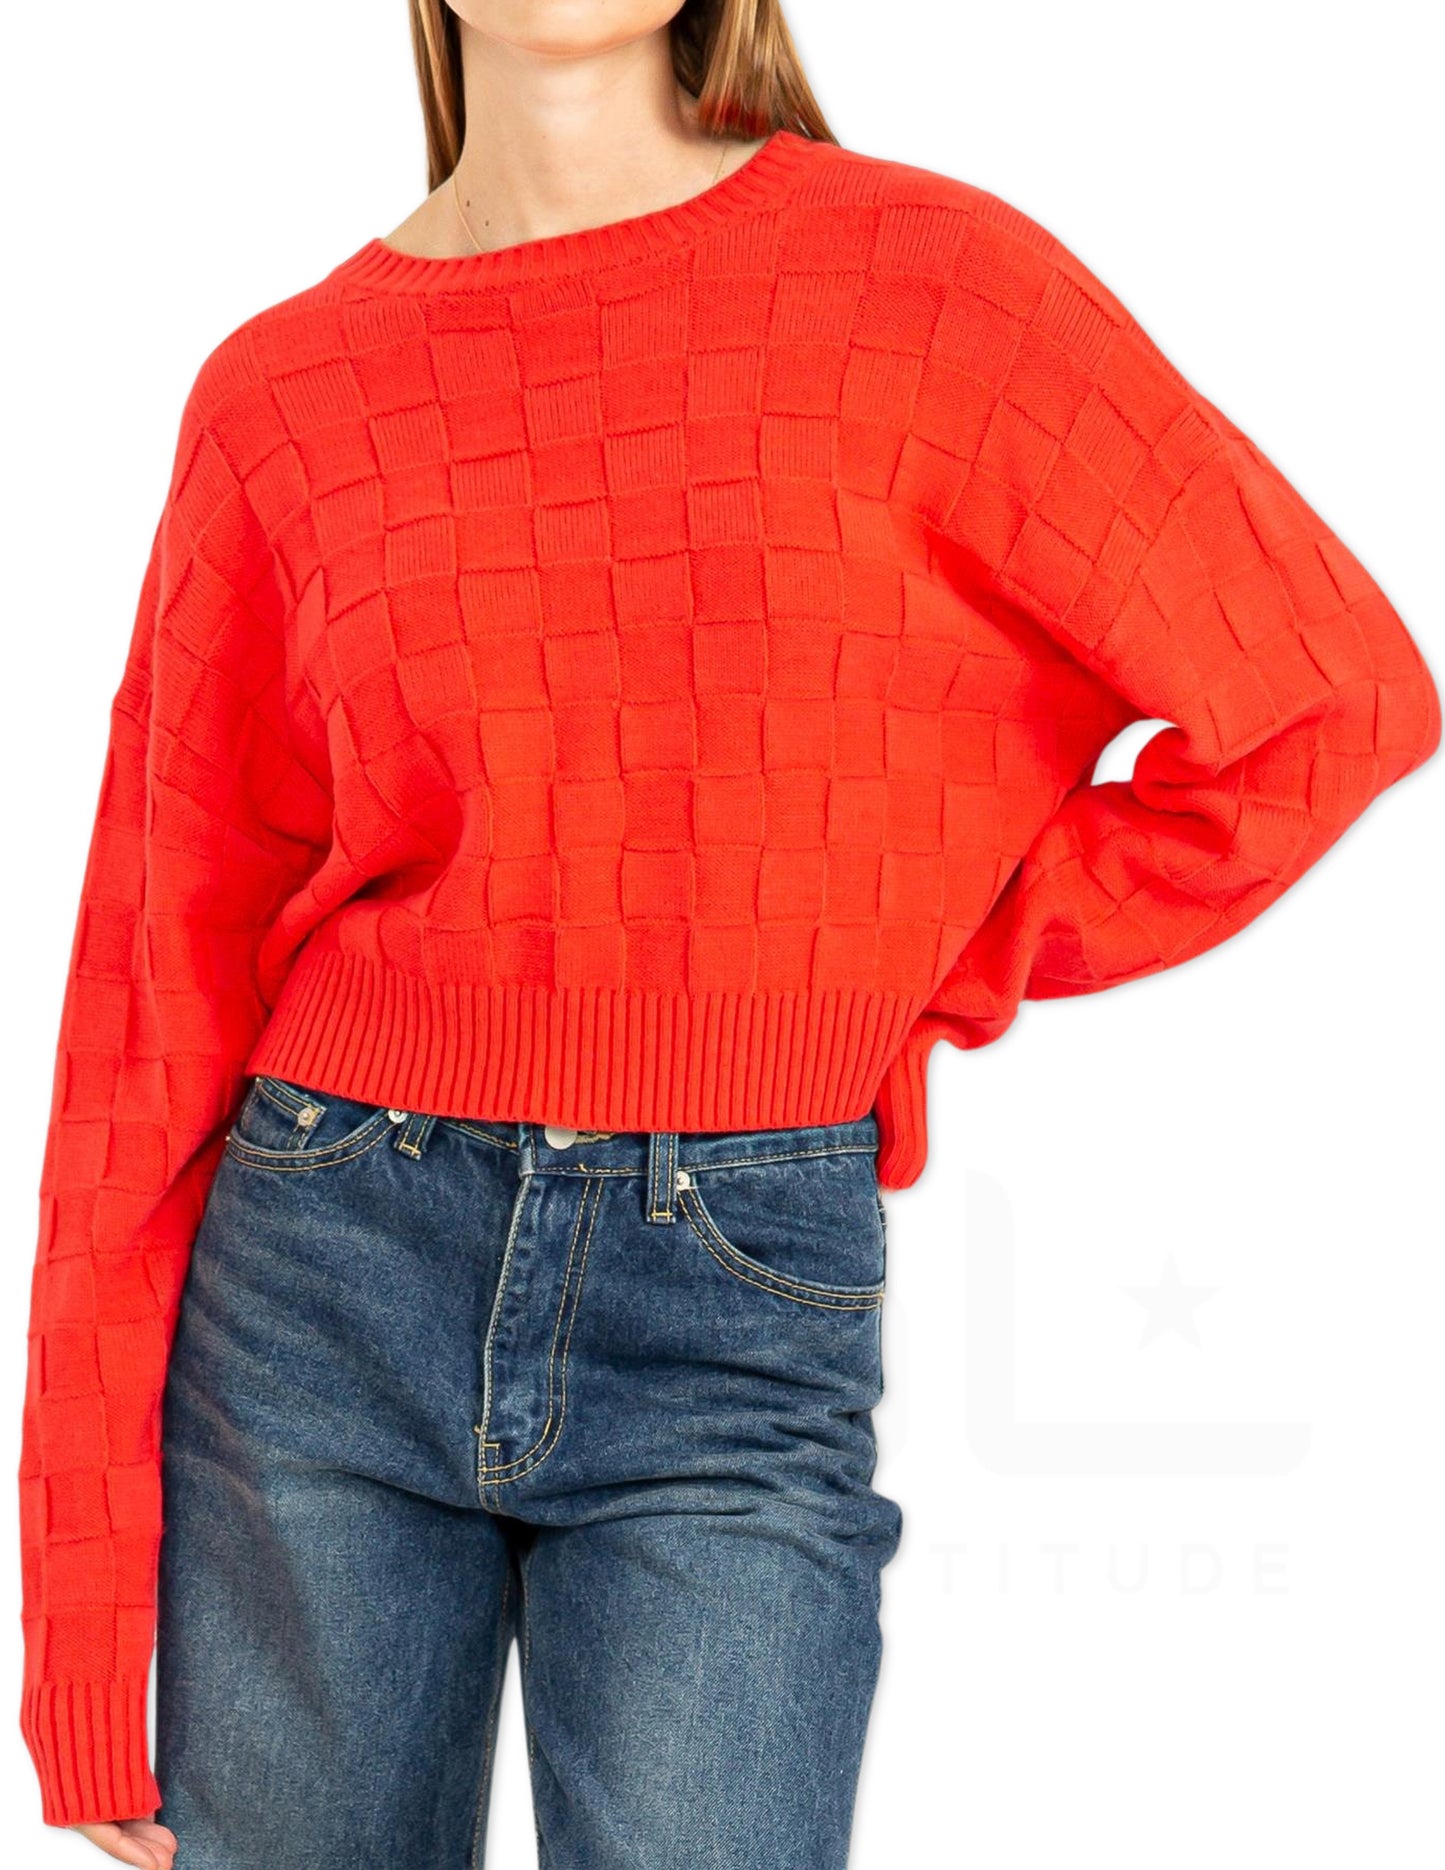 Square Texture Long Sleeve Sweater - Red